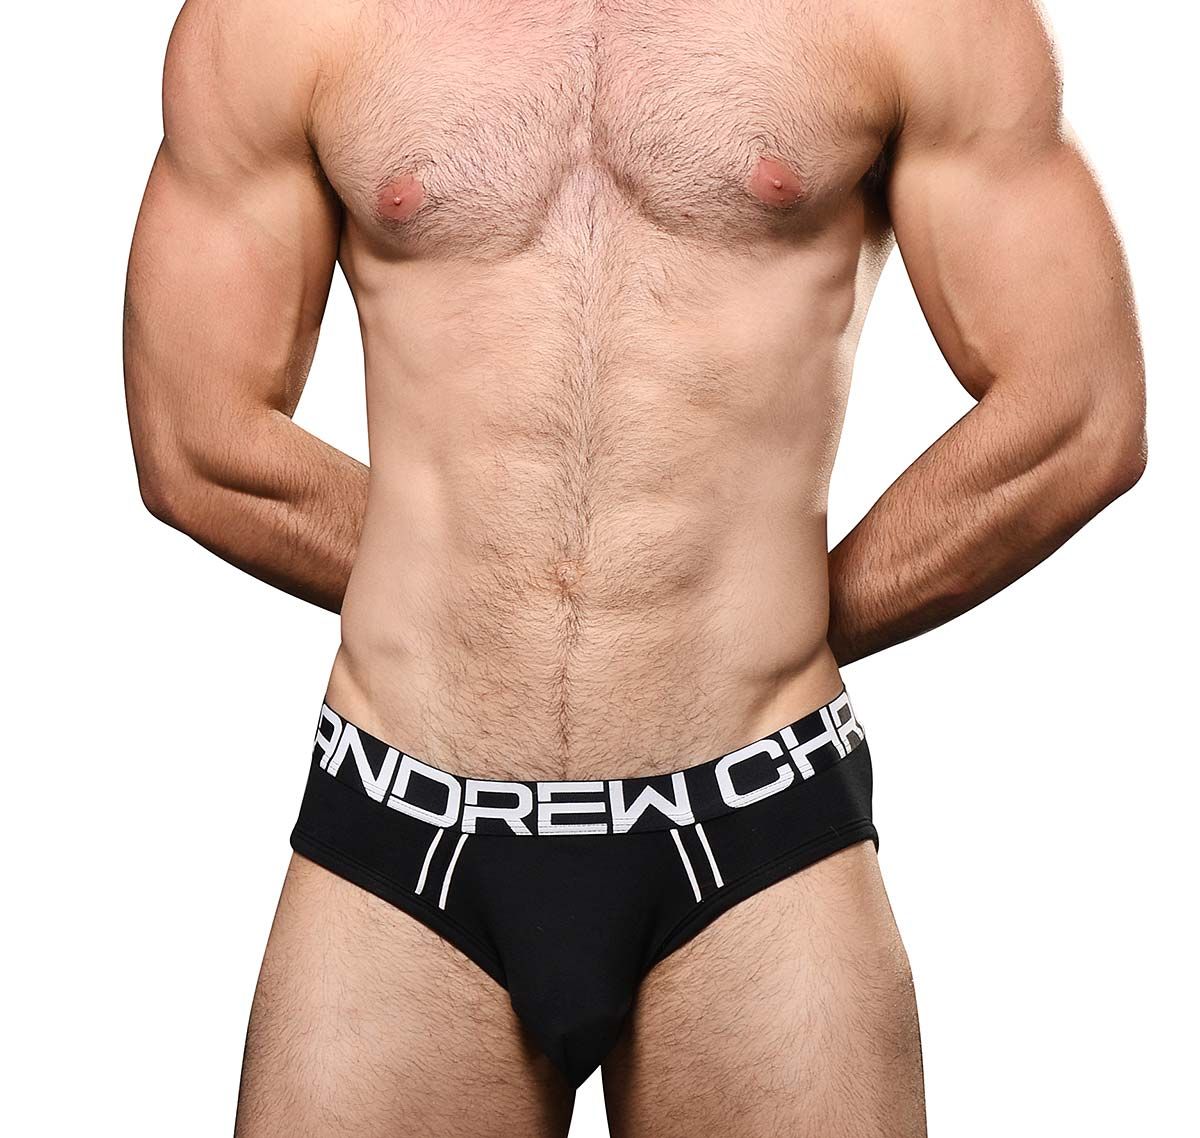 Andrew Christian Slip TROPHY BOY FOR HUNG GUYS BRIEF 93007, negro